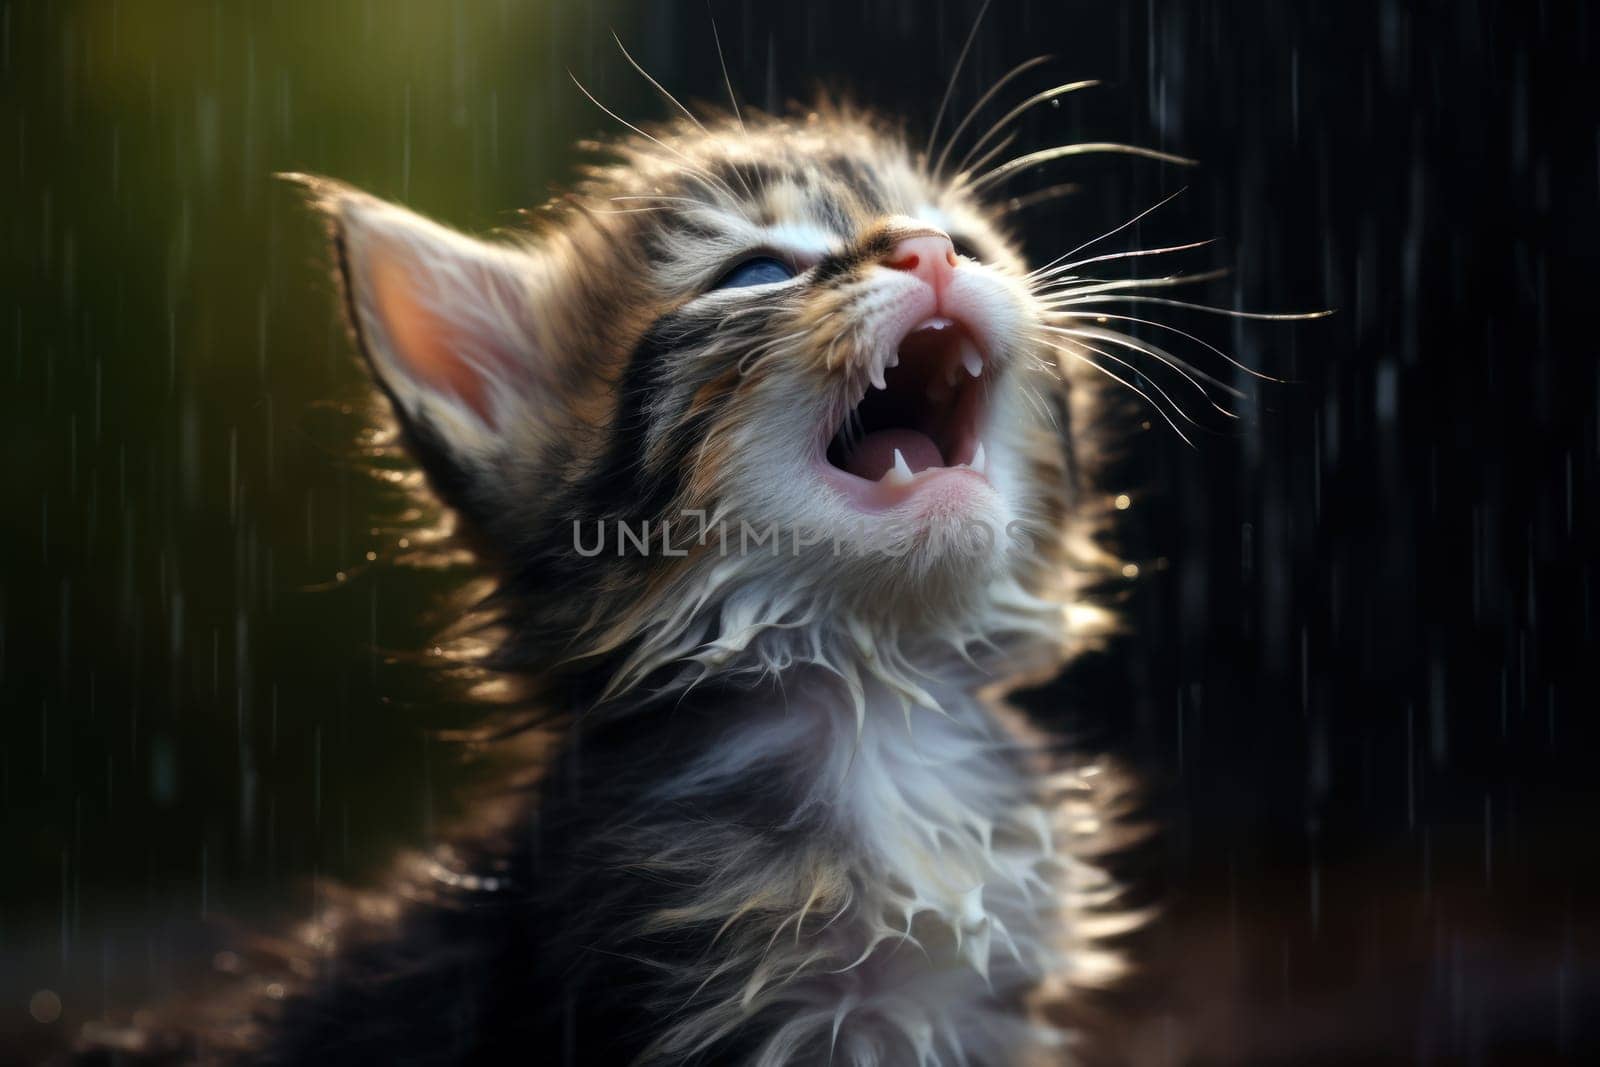 A kitten with floppy ears trying to catch the raindrops with its tongue by nijieimu